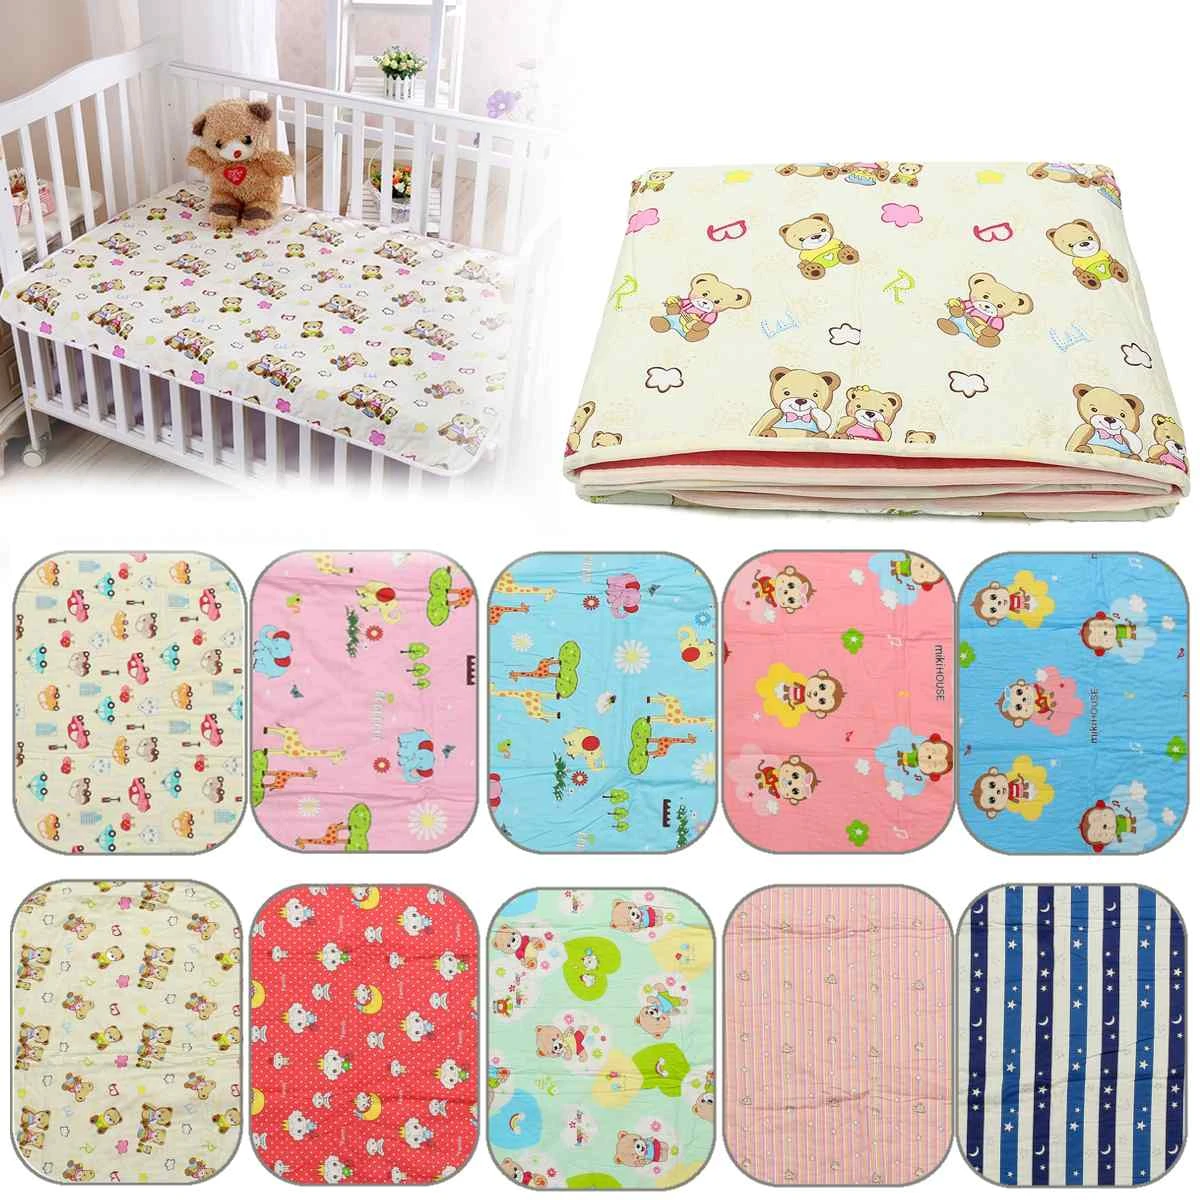 Baby Infant Diaper Nappy Urine Mat Kid Waterproof Bedding Changing Cover Pad US